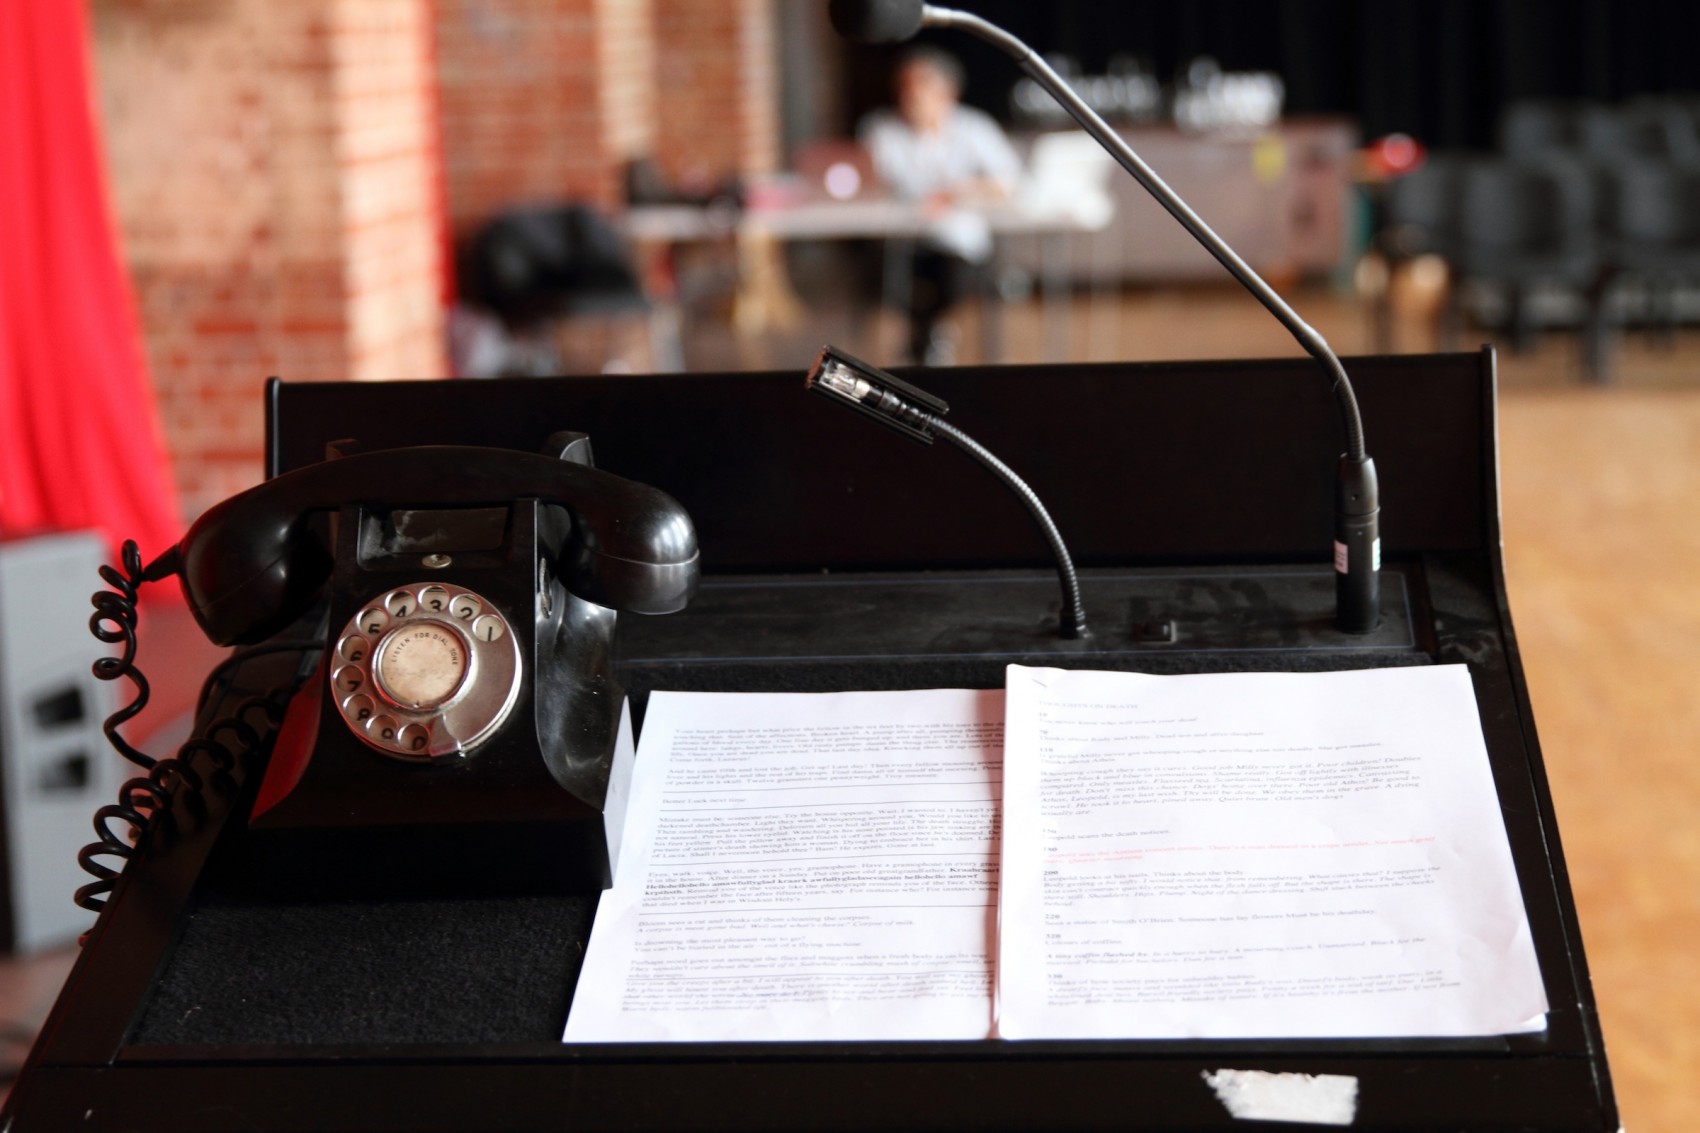 Old fashioned black telephone on stand with papers against a blurred room background